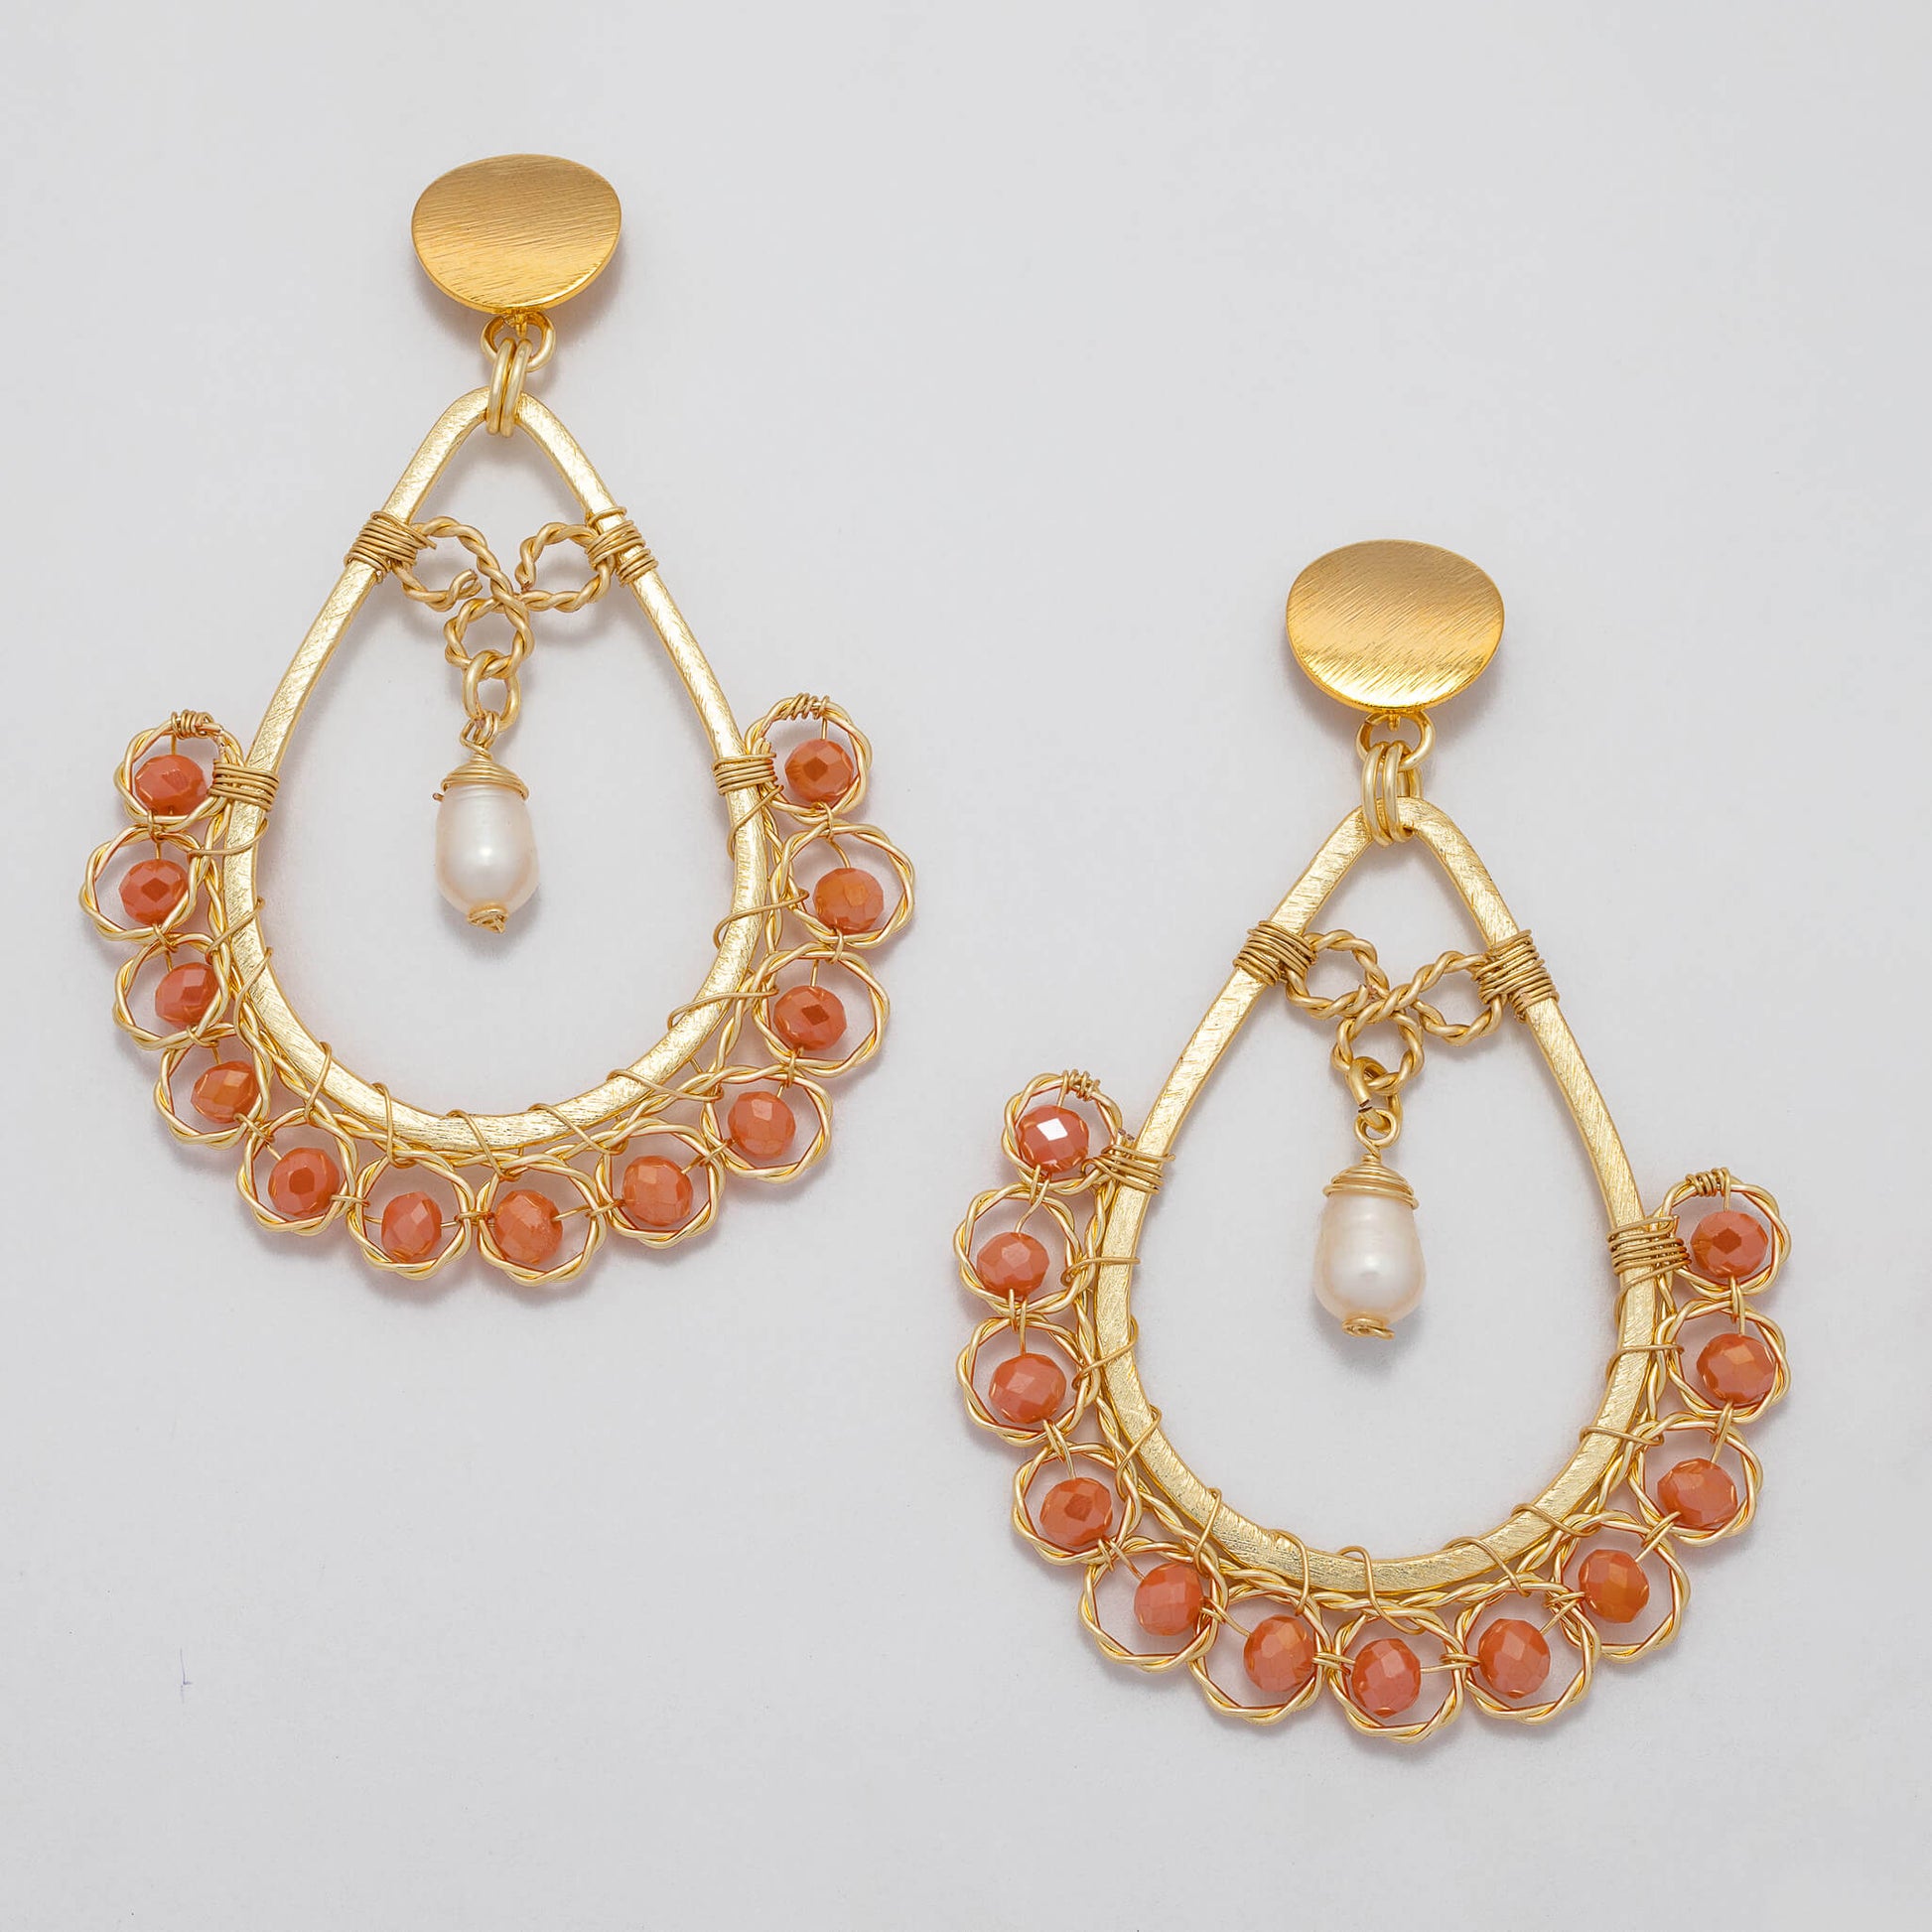 Amara I Earrings are 3 inches long. Gold teardrop Earrings. Gold, Orange, and White earrings. Handmade with Faceted Crystal beads and freshwater pearls. Wire Wrapped Earrings.